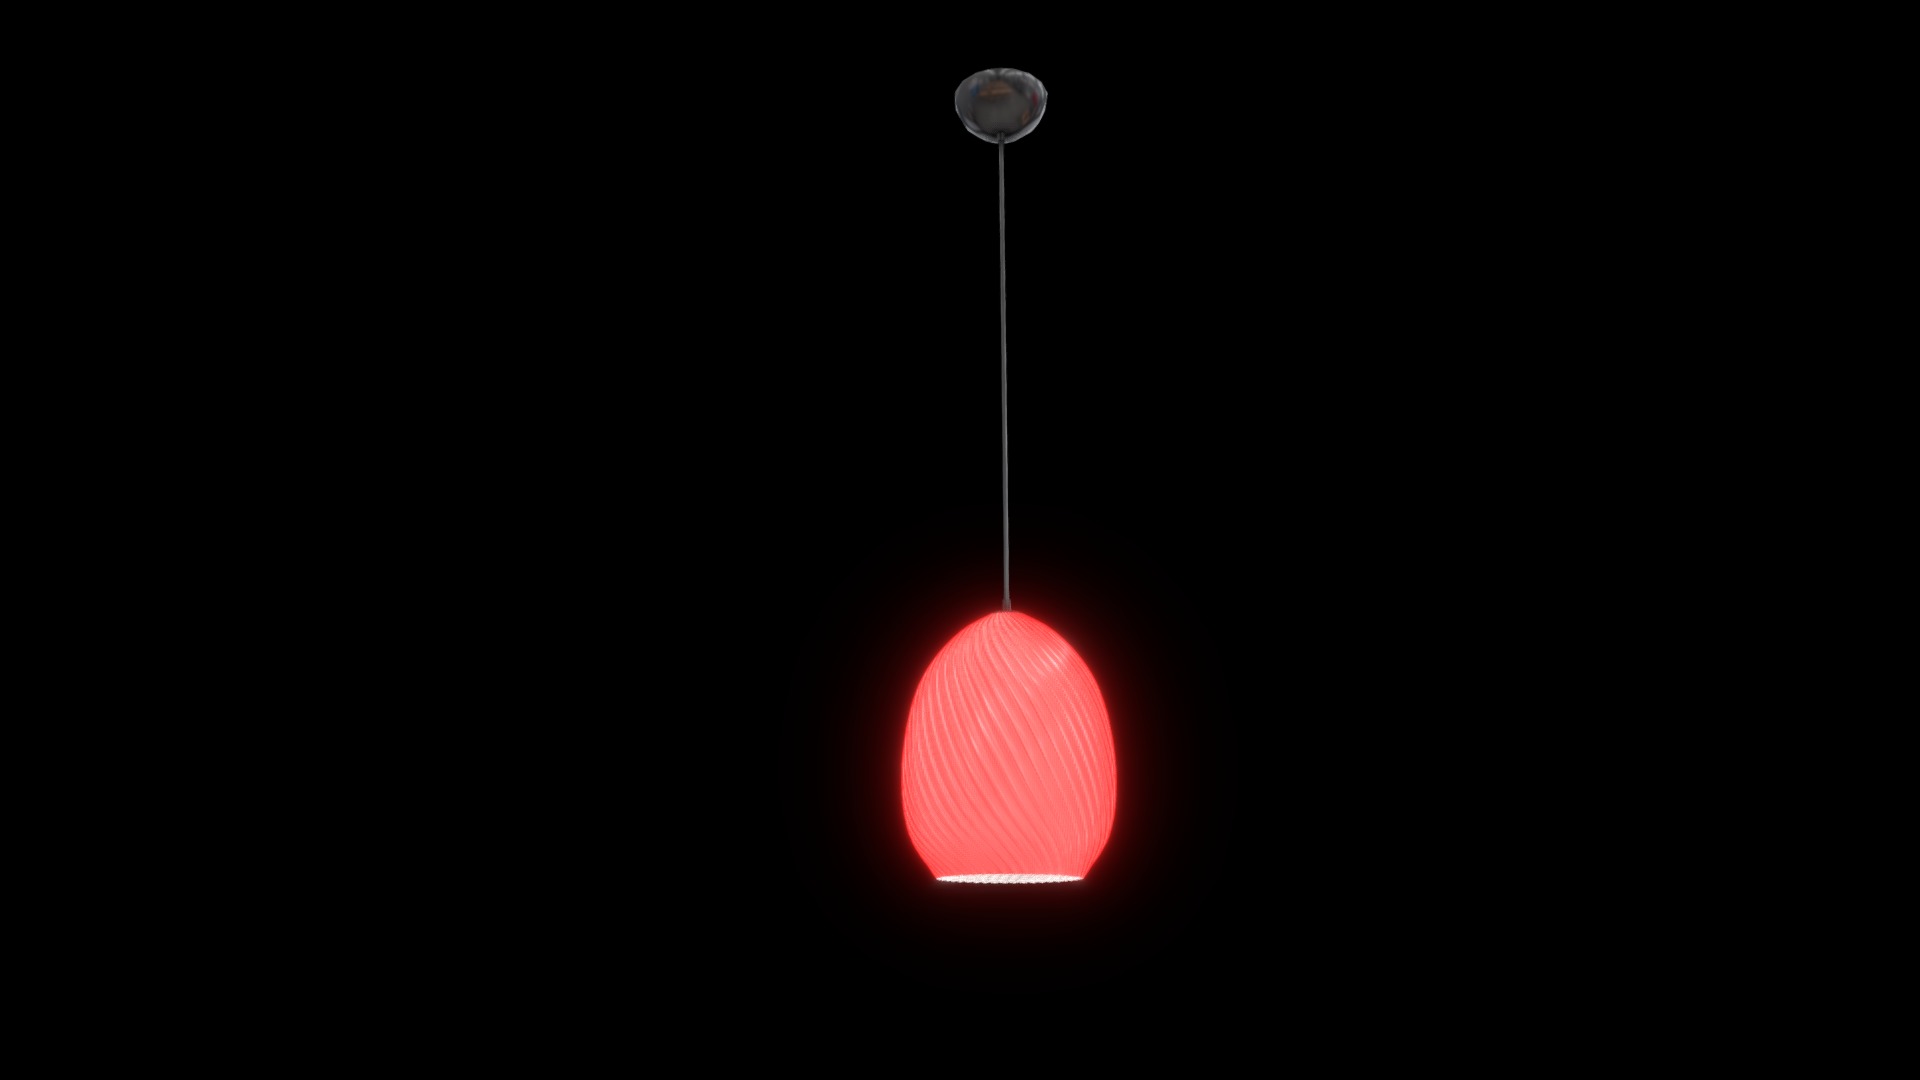 3D model HGPH-3544M - This is a 3D model of the HGPH-3544M. The 3D model is about a red and white circle with a light on it.